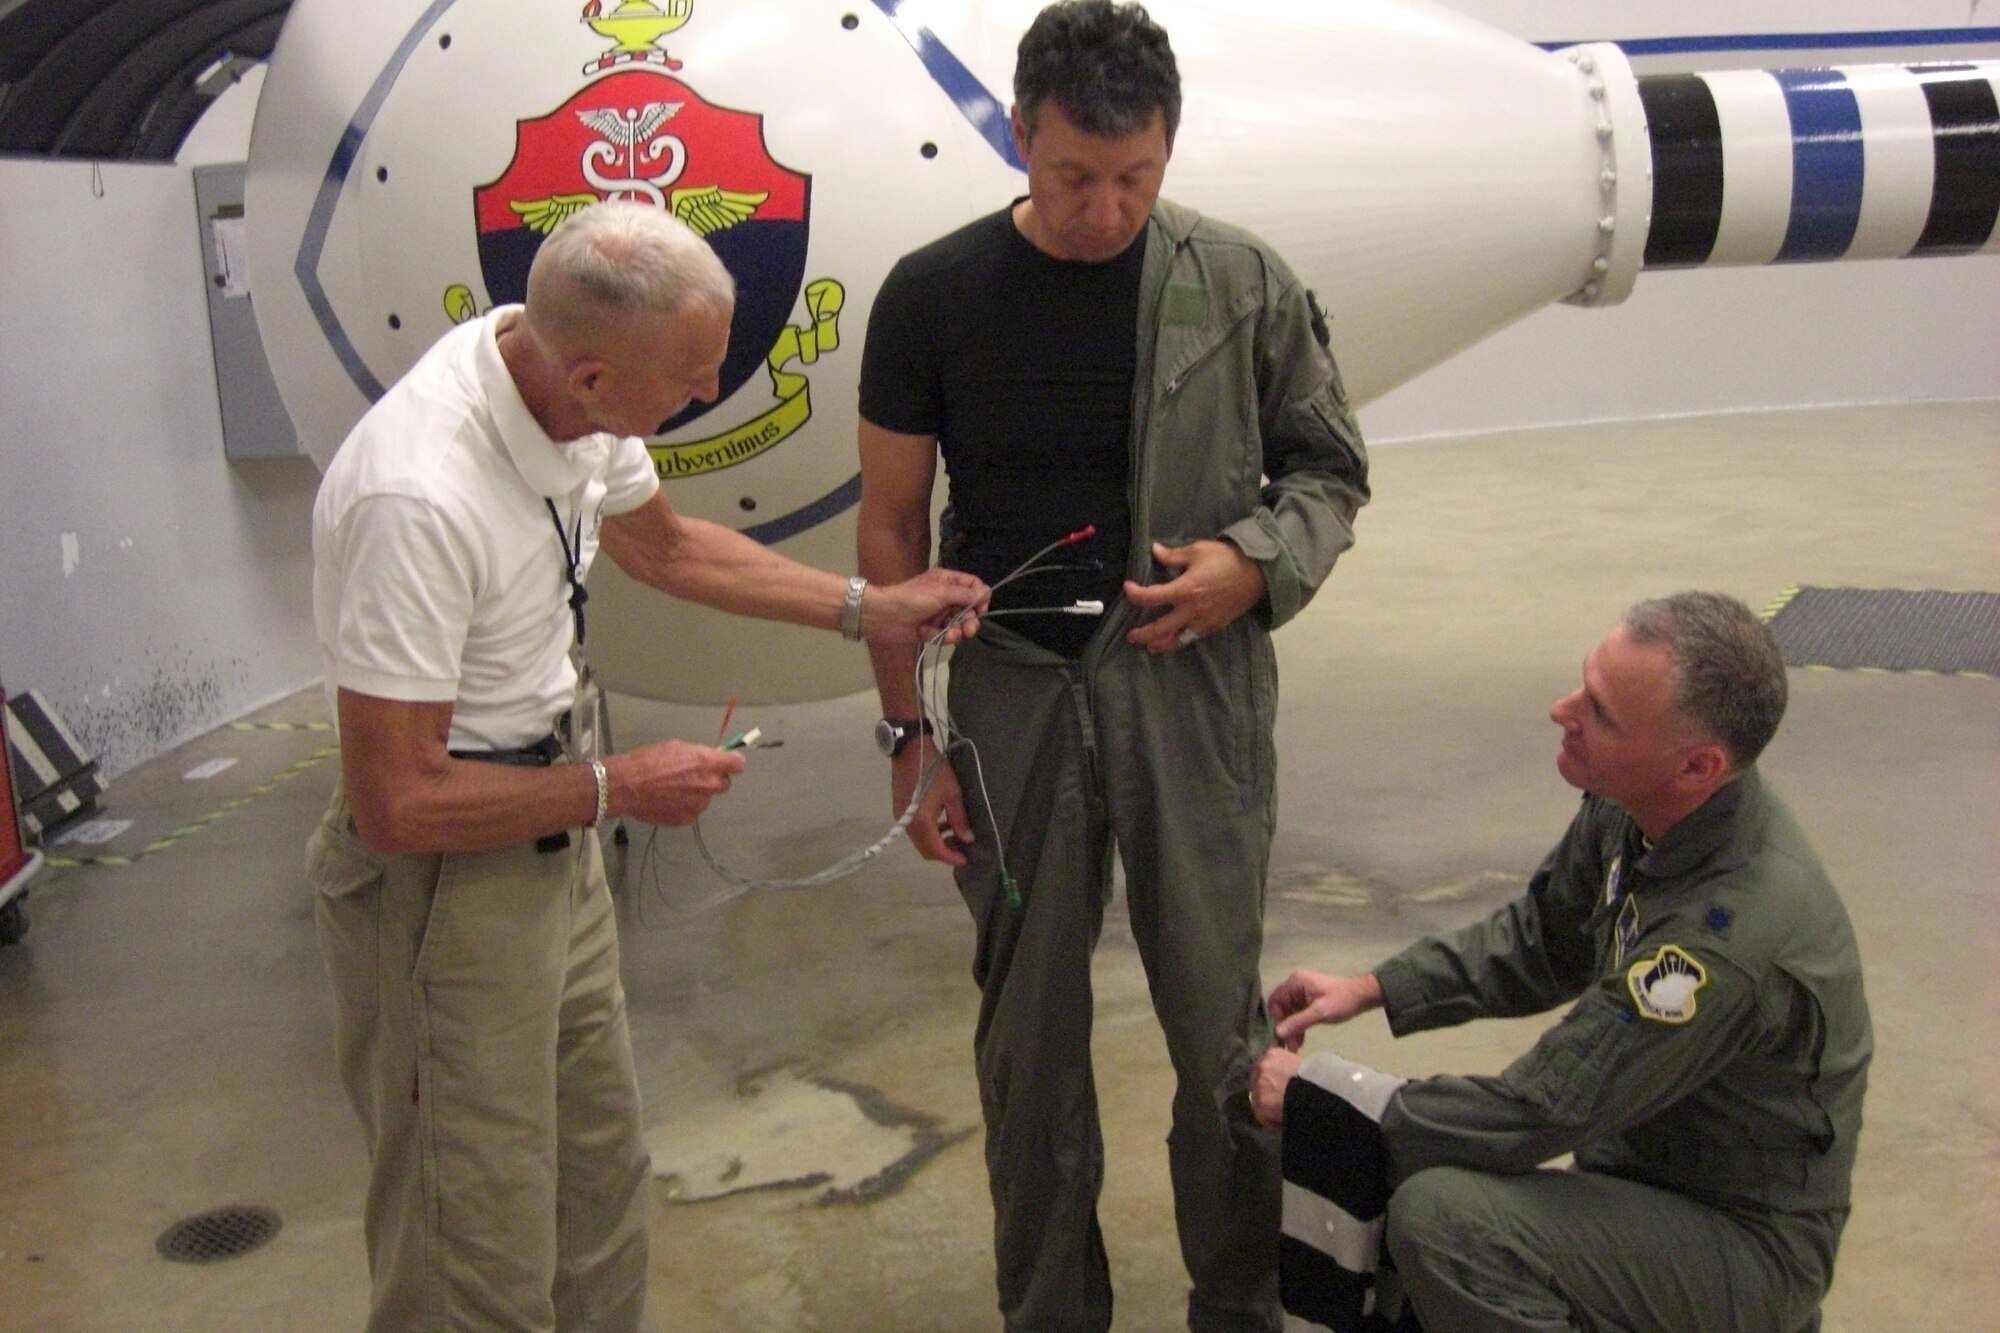 Lt. Col. Lance Annicelli (right) and Dr. Ulf Balldin (left) fit retired Capt. James Kisner with a prototype muscle stimulation suit on May 25 to perform a centrifuge test as part of an acceleration protection research project they are conducting at Brooks City-Base, Texas. The three men designed a garment which will be worn by pilots that will automatically sense and contract lower body muscles during and throughout excessive G-forces during flight.  (U.S. Air Force photo by Durrell Bess)